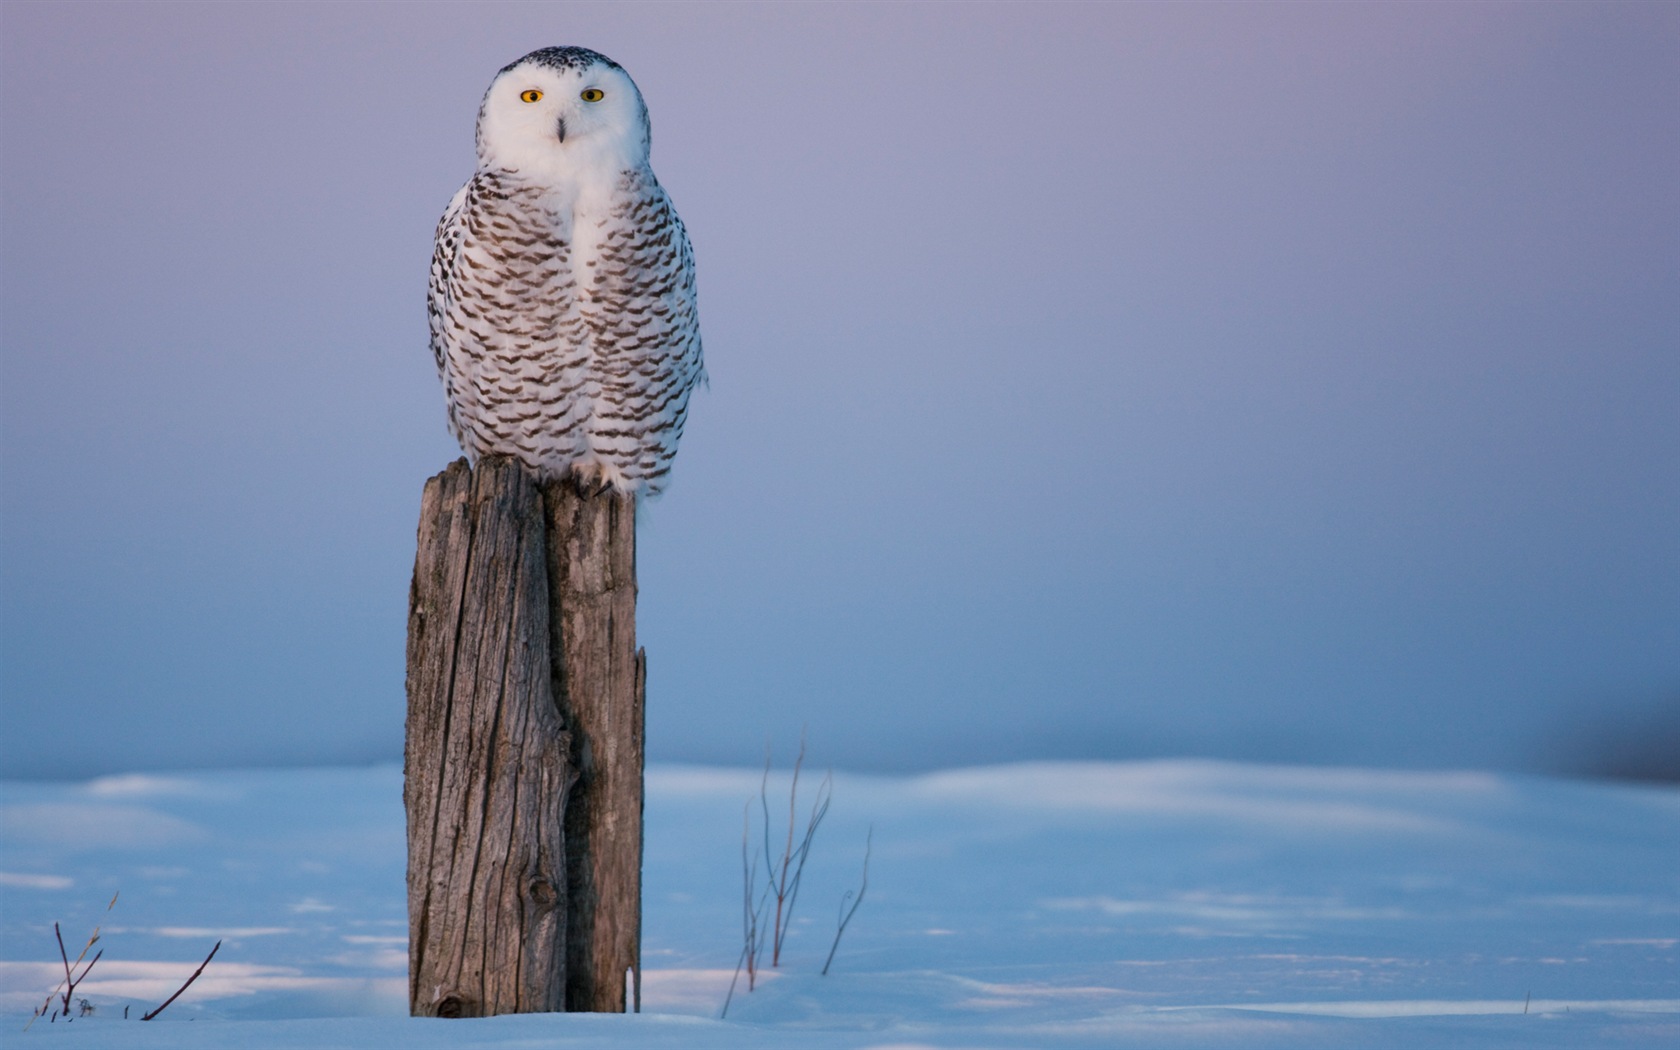 Windows 8 Wallpapers: Arctic, the nature ecological landscape, arctic animals #2 - 1680x1050